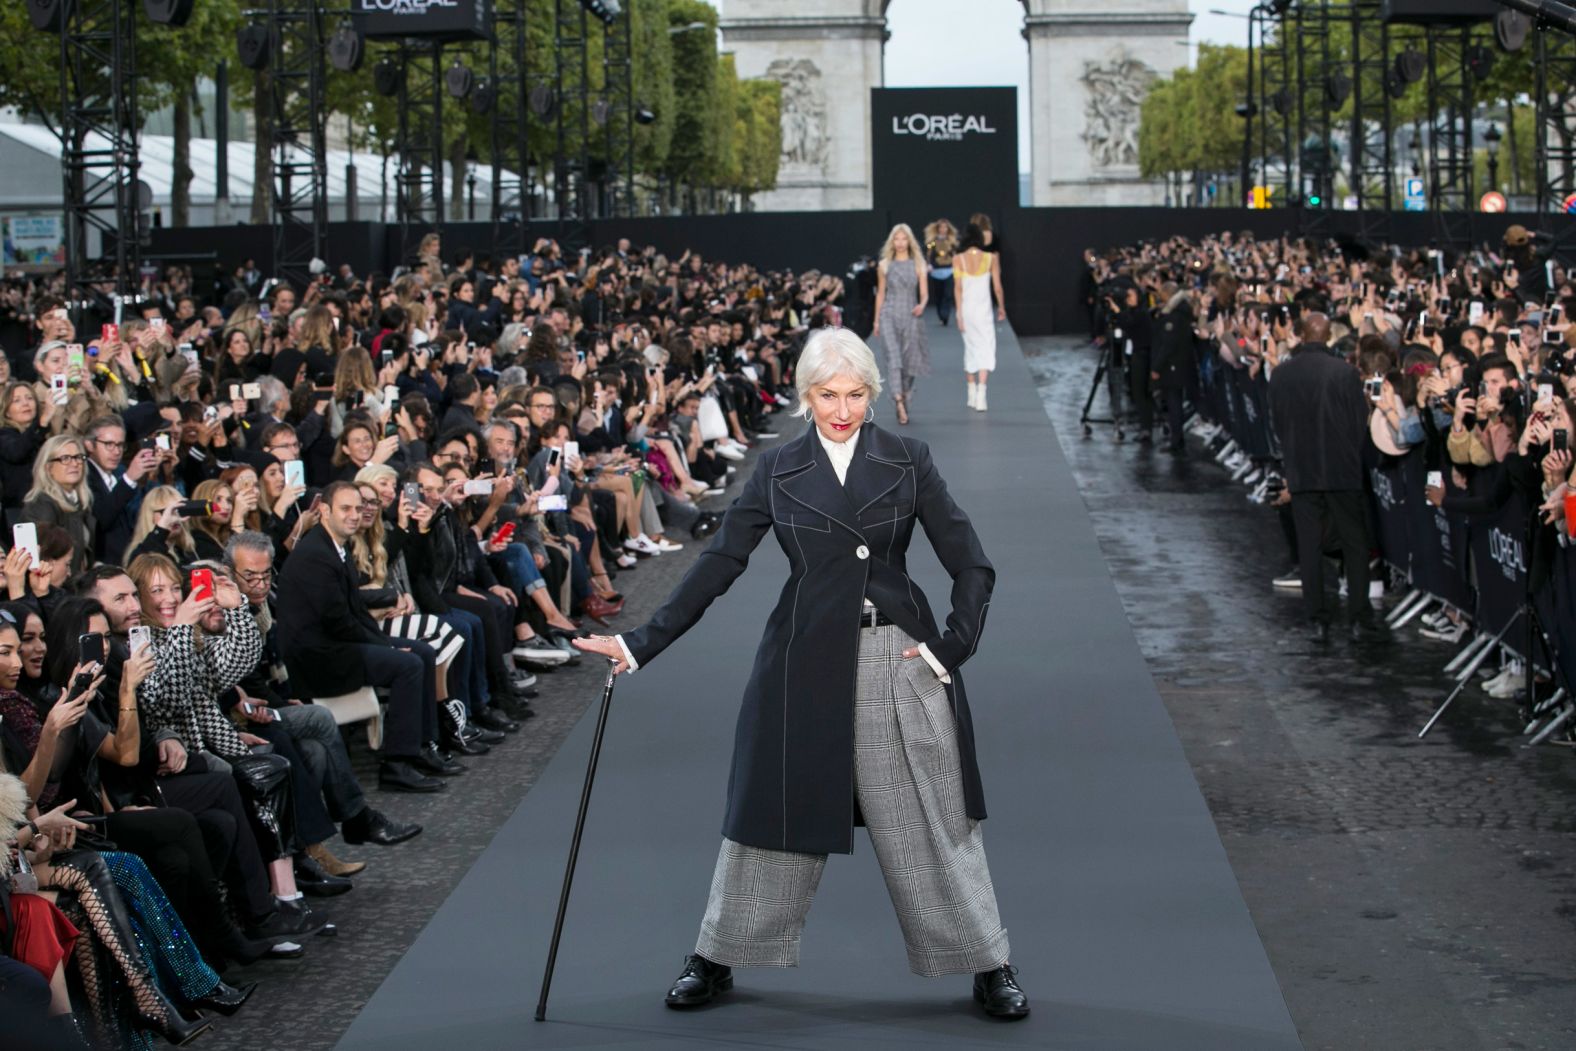 Mirren takes part in a L'Oreal fashion show in Paris in 2017.